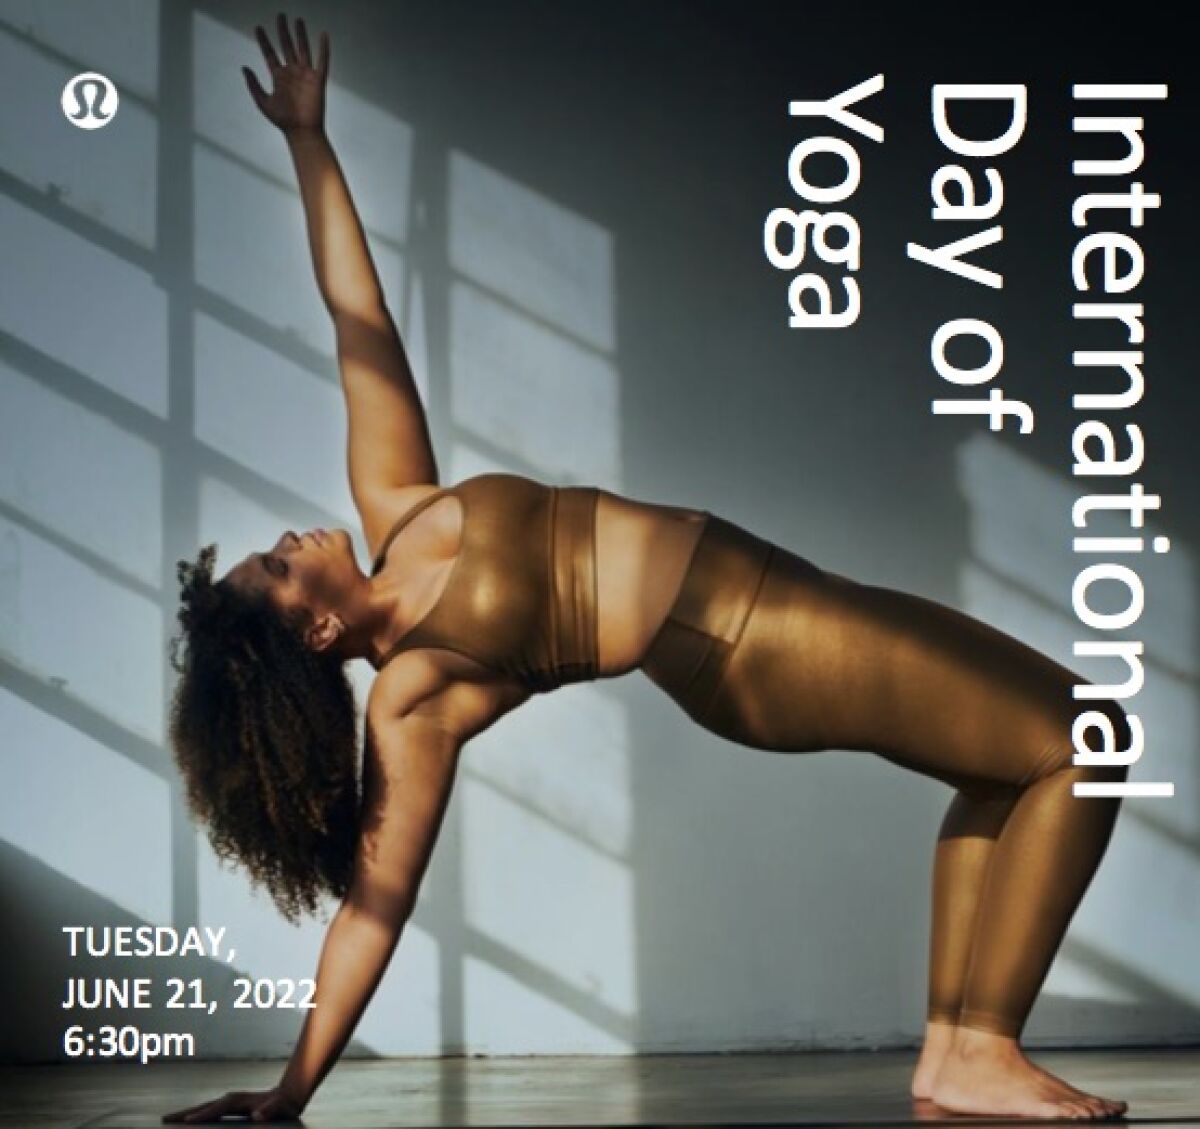 Vibe Flow Yoga and Lululemon have teamed up to celebrate International Day of Yoga on June 21.